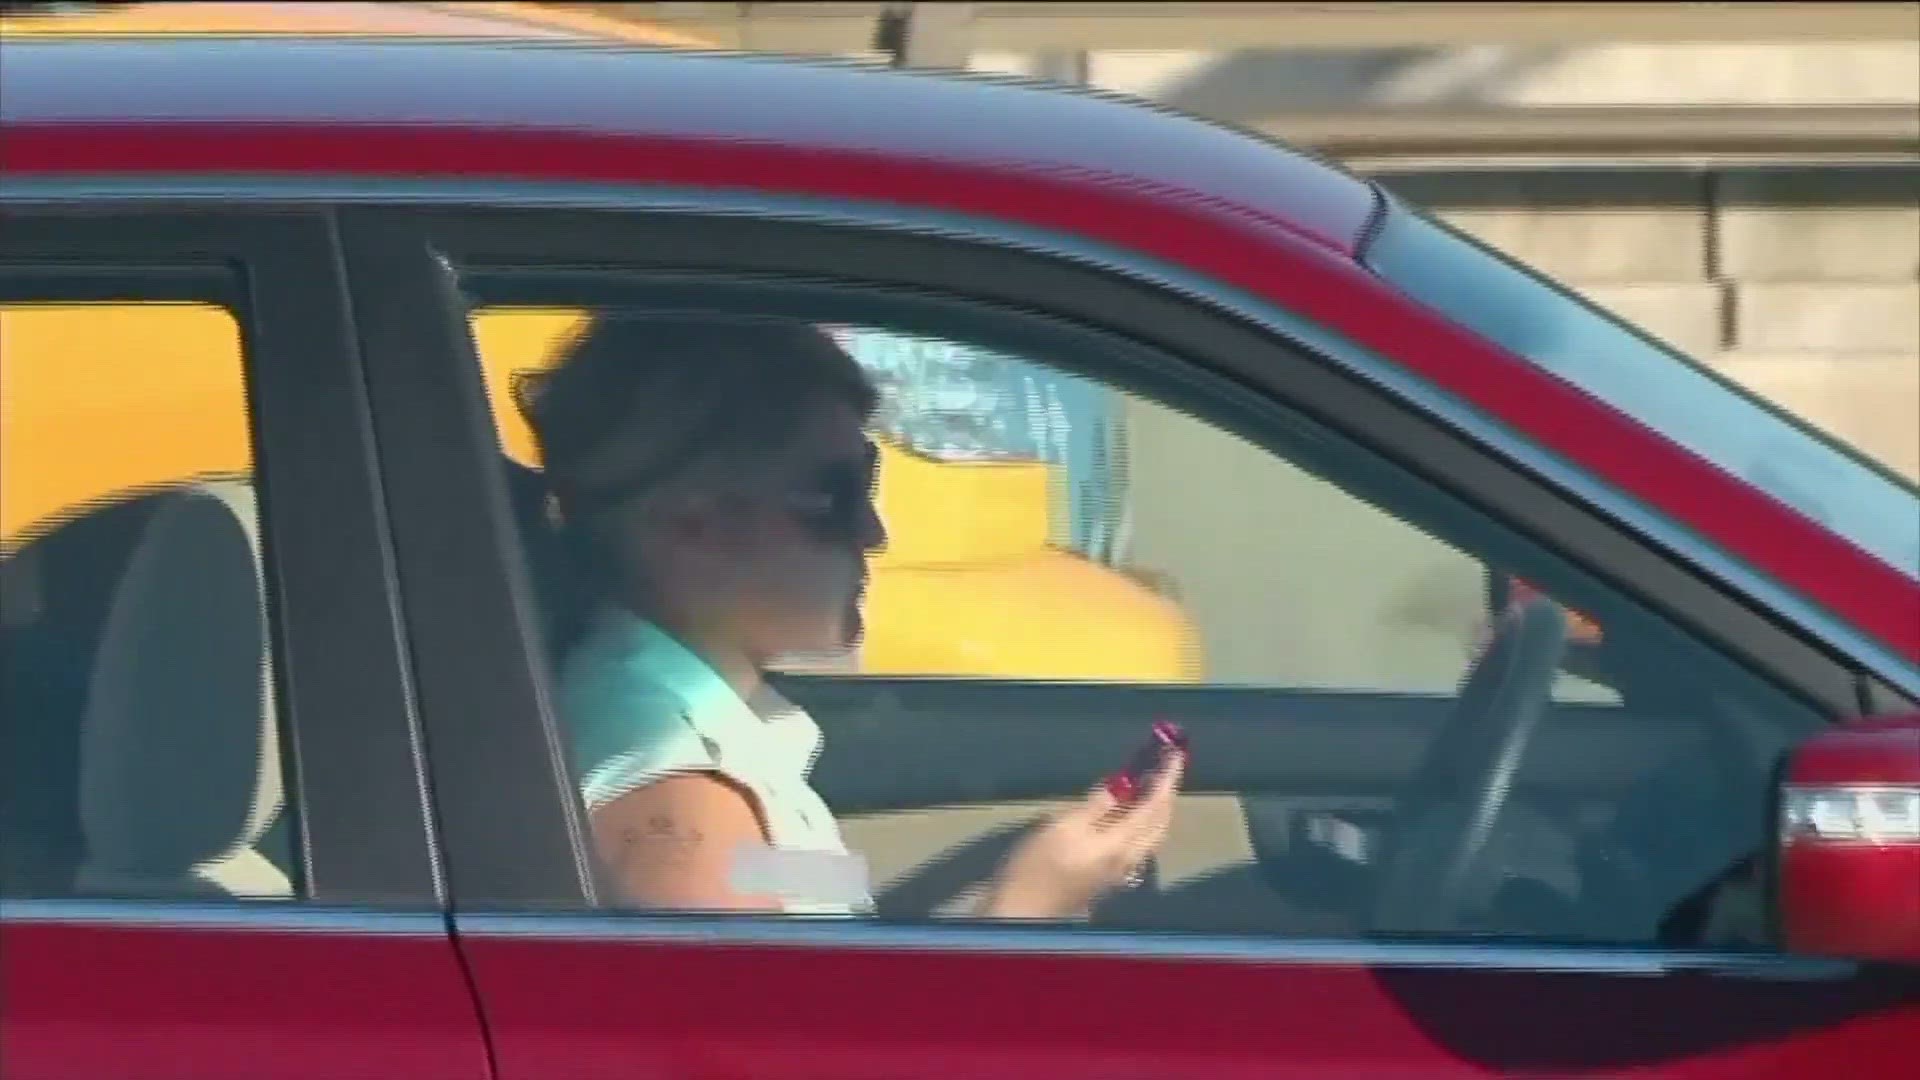 The new law prohibits having your phone in your hand while in the vehicle, even at stop lights.